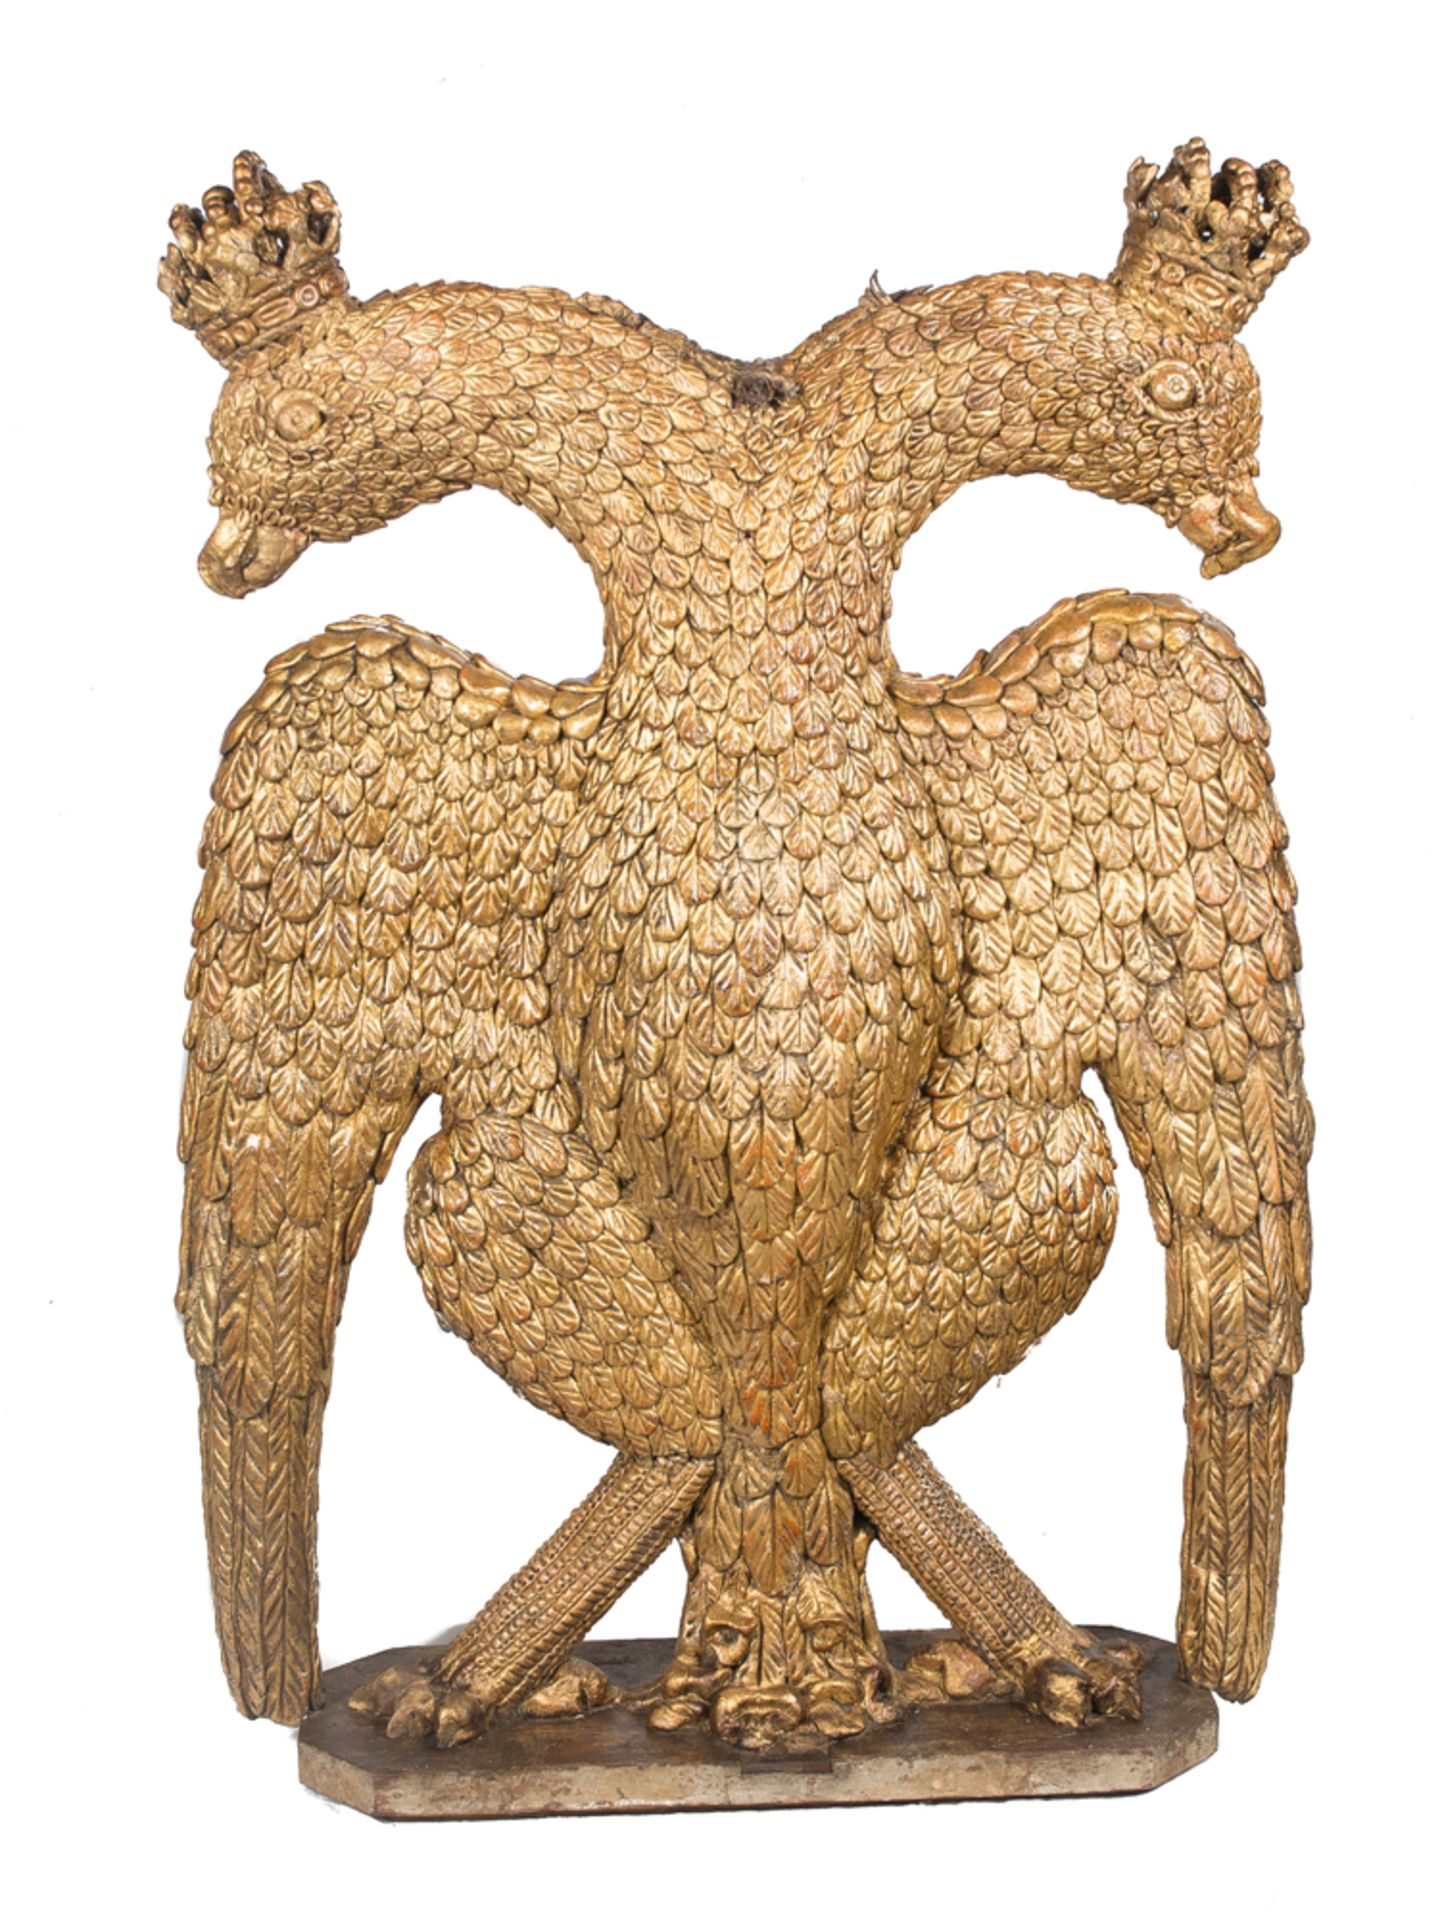 "Double-headed eagle". Large carved and gilded sculpture. 18th century. - Image 2 of 5